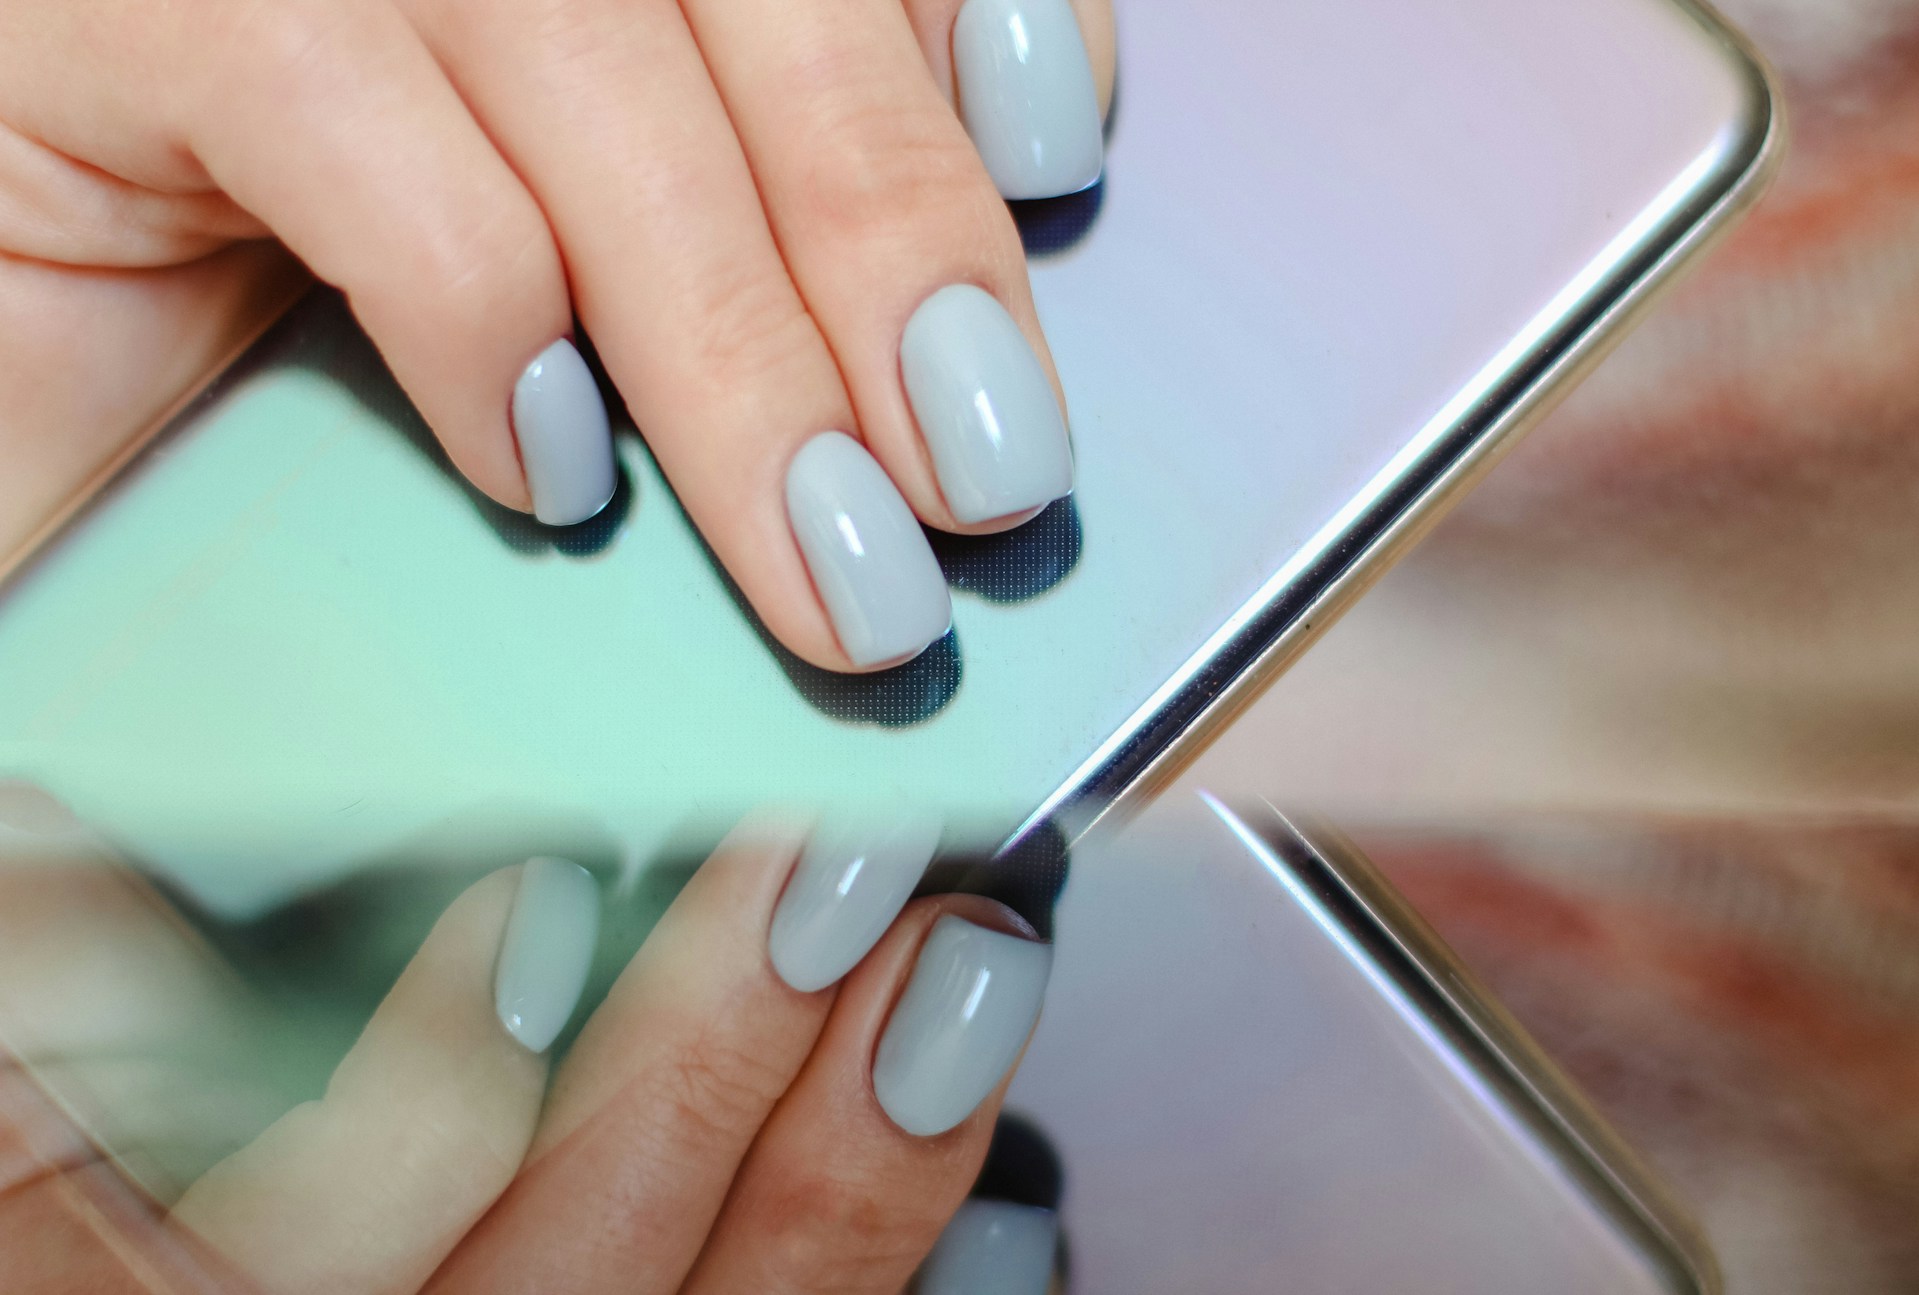 5. TikTok's Viral Nail Polish Colors That You Need to Try - wide 3